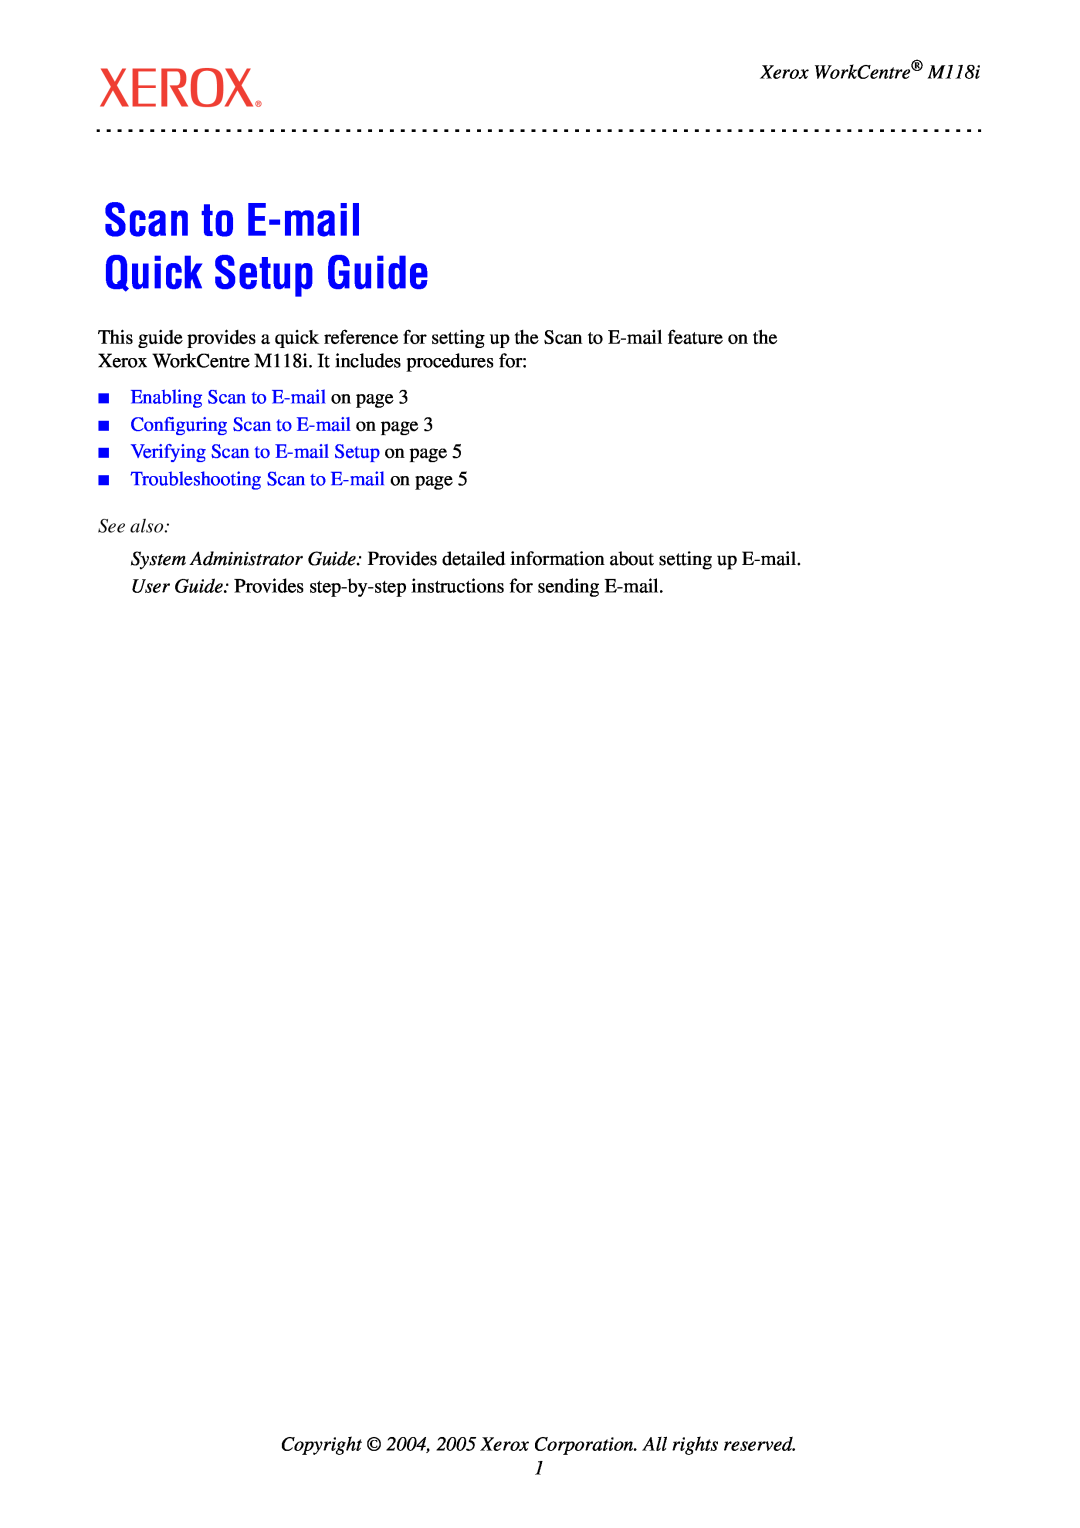 Xerox manual Scan to E-mail Quick Setup Guide, Xerox WorkCentre M118i, Enabling Scan to E-mail on page, See also 